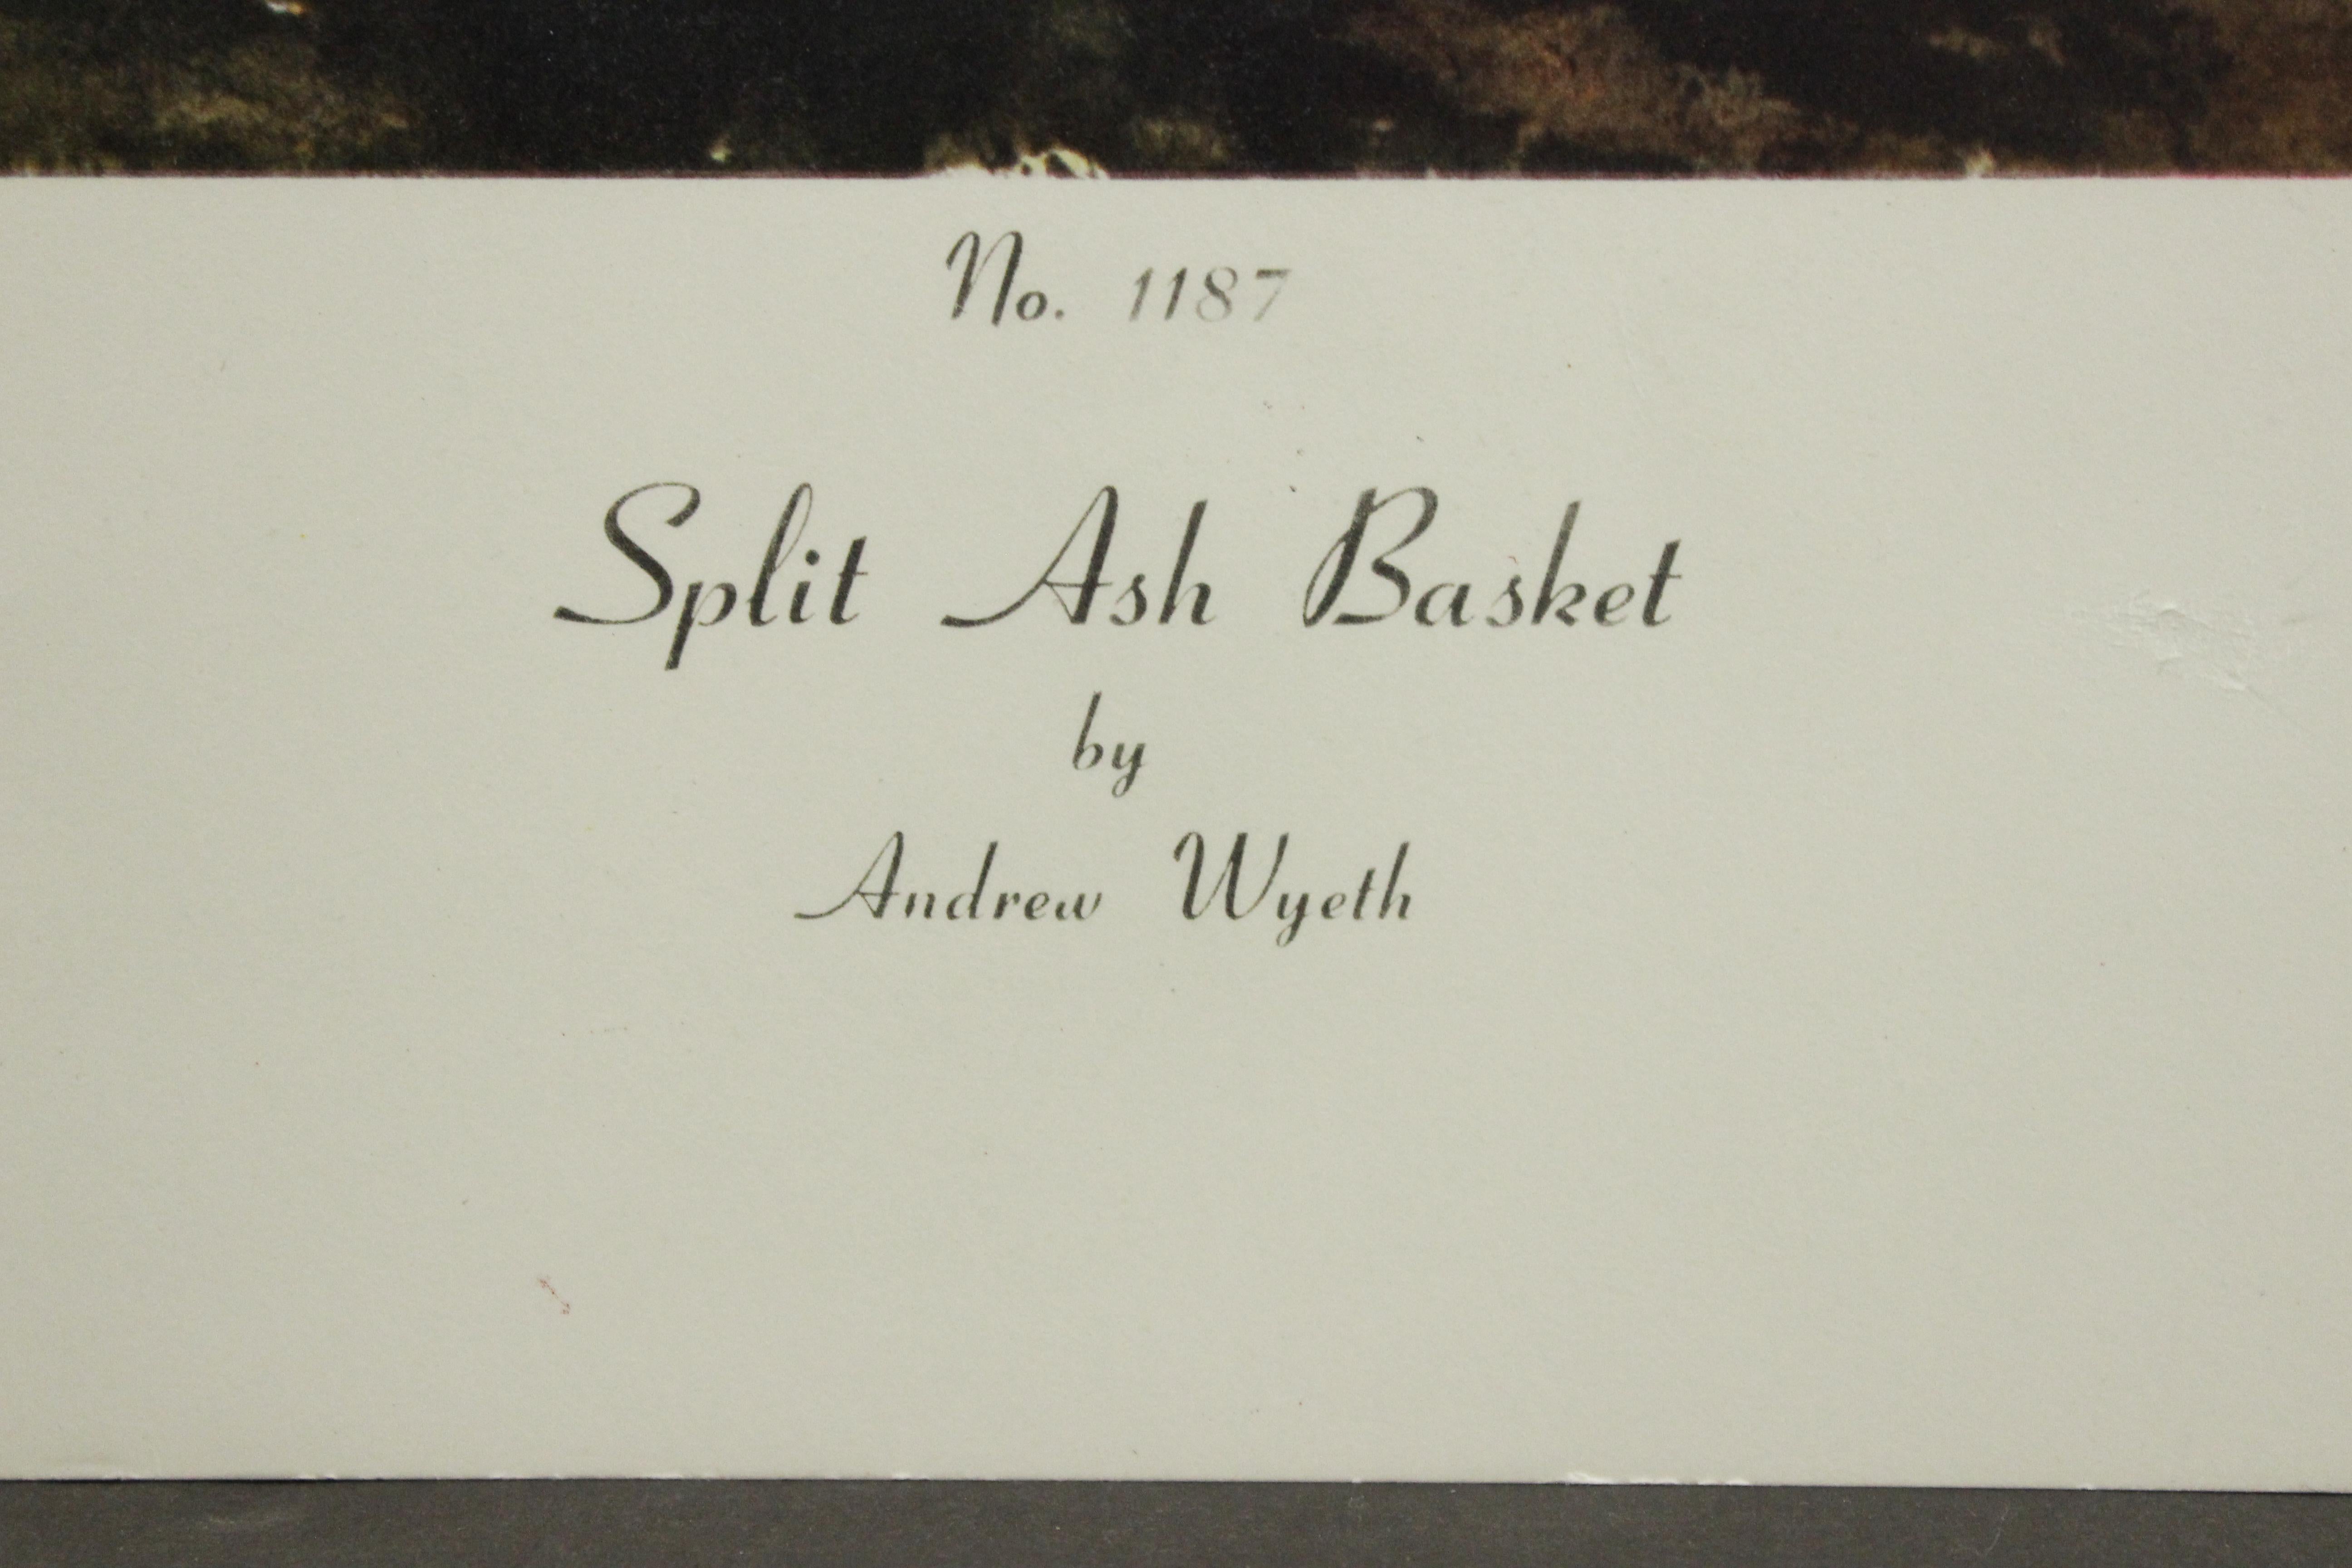 Split Ash Basket-Poster. Copyright Aaron Ashley, Inc.  - Print by (after) Andrew Wyeth